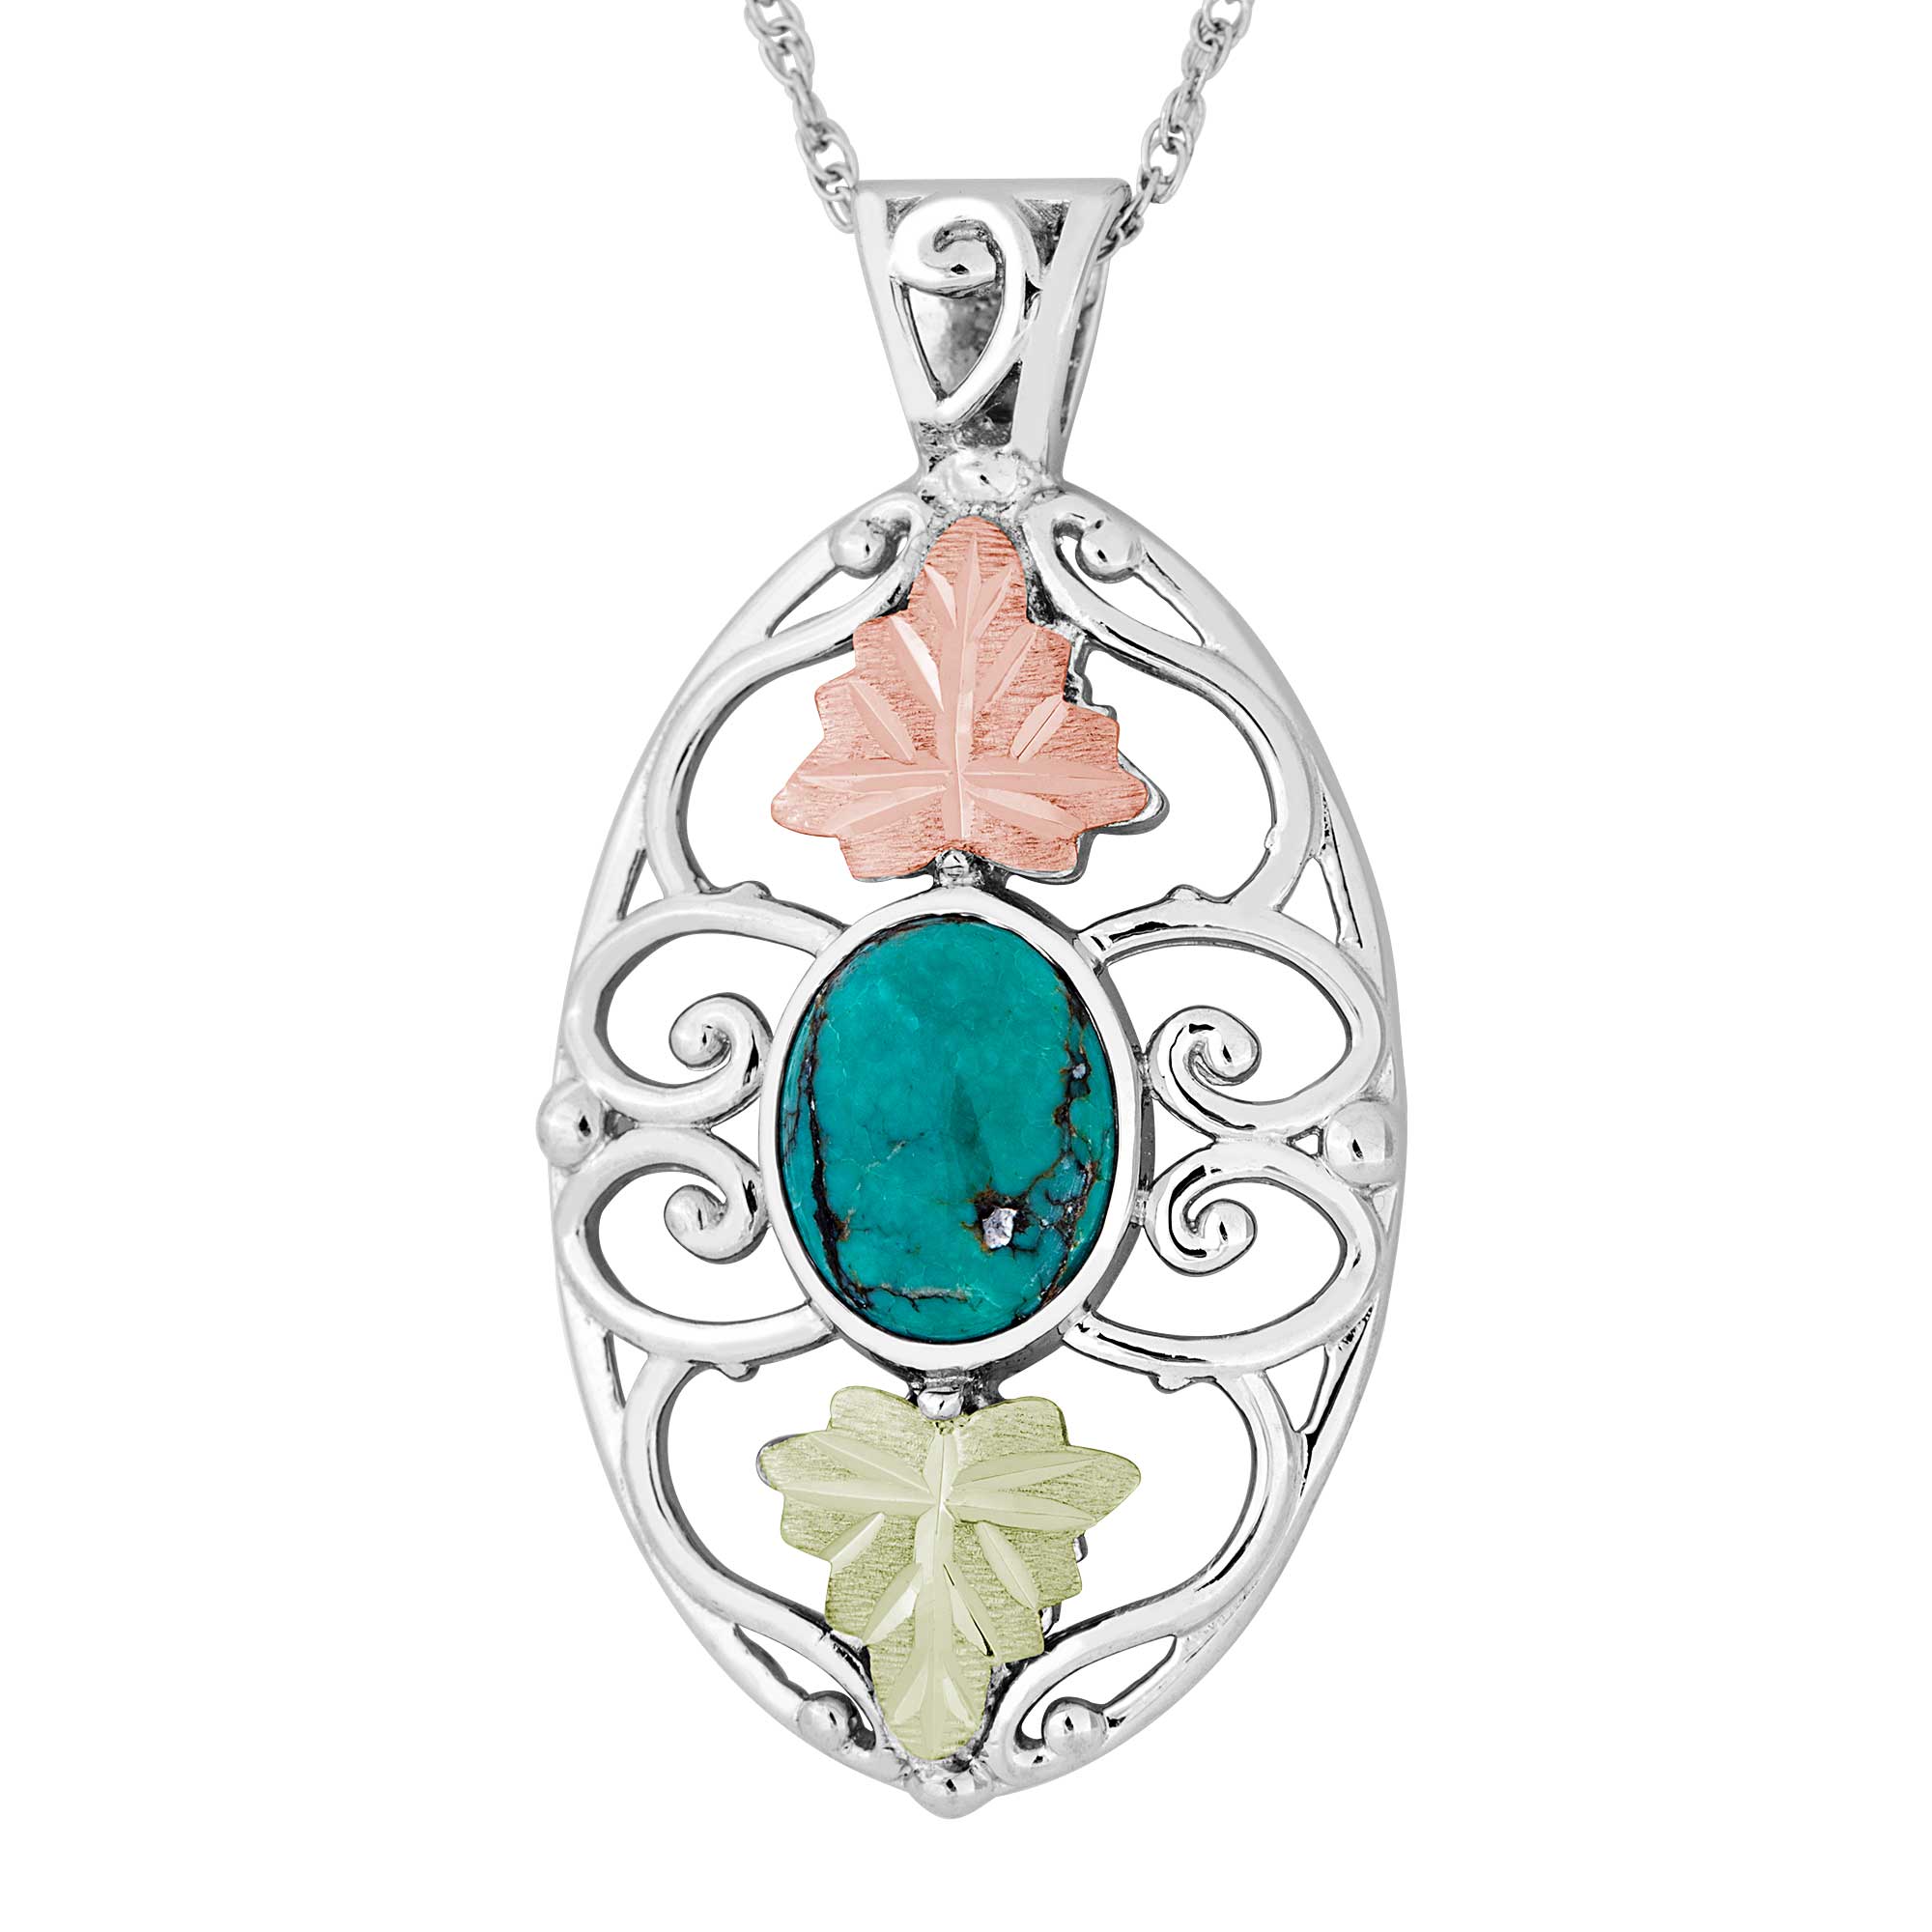 Turquoise Pendant Necklace, Sterling Silver, 12k Green and Rose Gold Black Hills Gold Motif